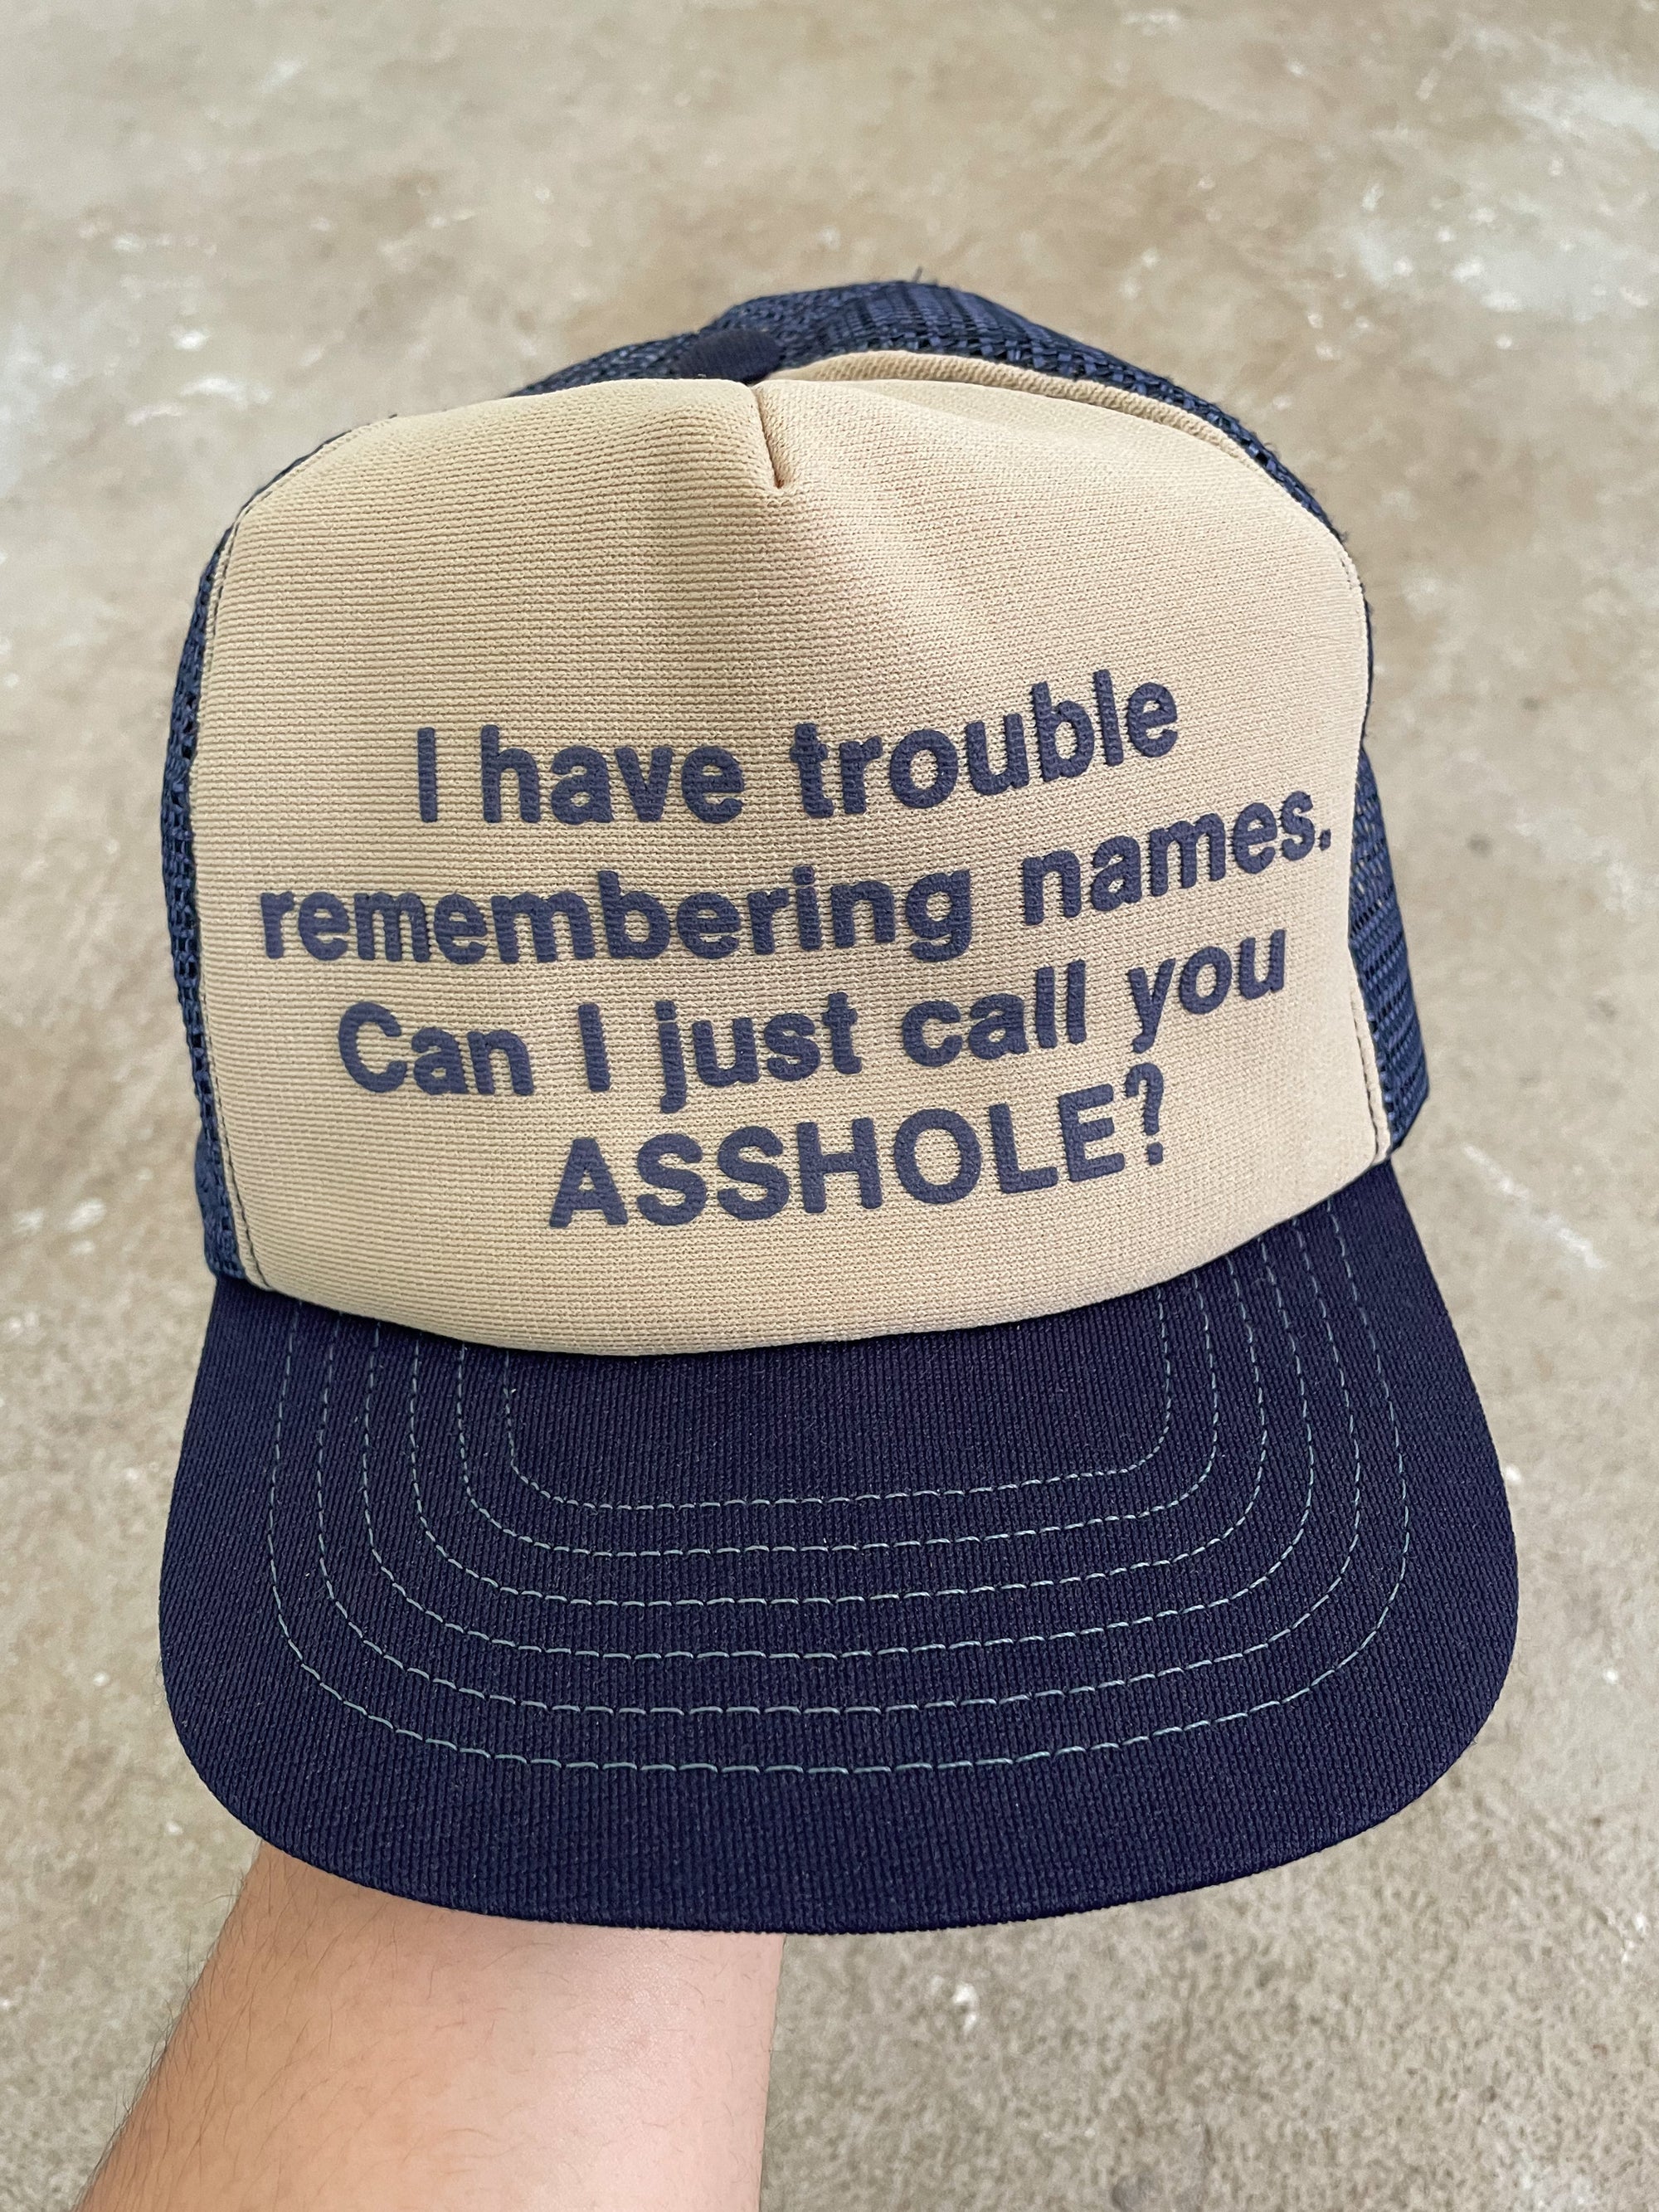 1980s “I Have Trouble Remembering Names…” Trucker Hat